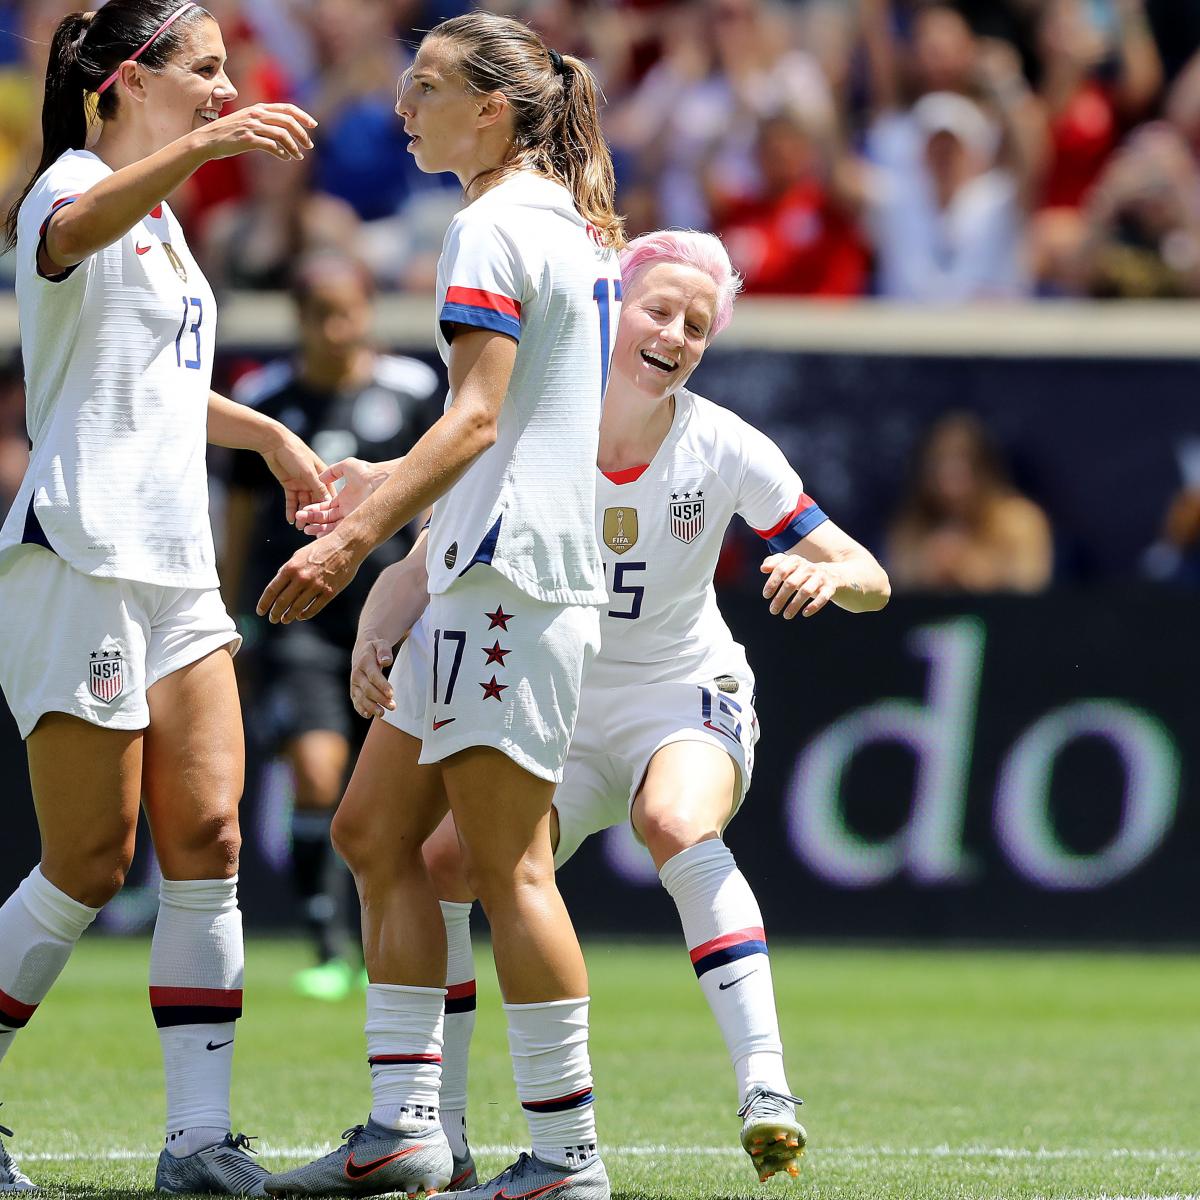 2019 Uswnt Jerseys Top Players And Reserves Bleacher Report Latest News Vid...